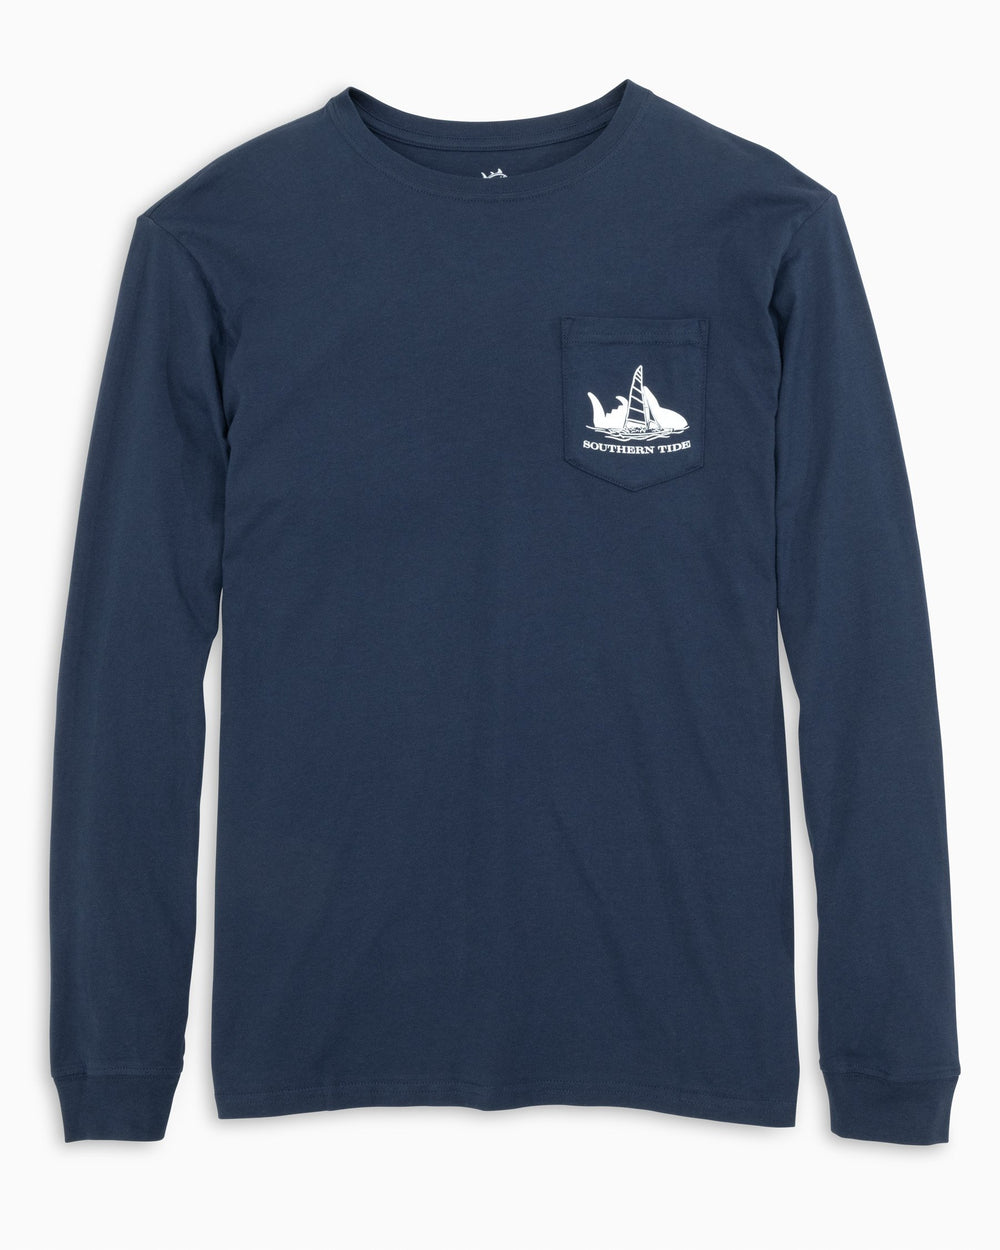 The front view of the Sunset Silhouette Long Sleeve T-Shirt by Southern Tide - Navy